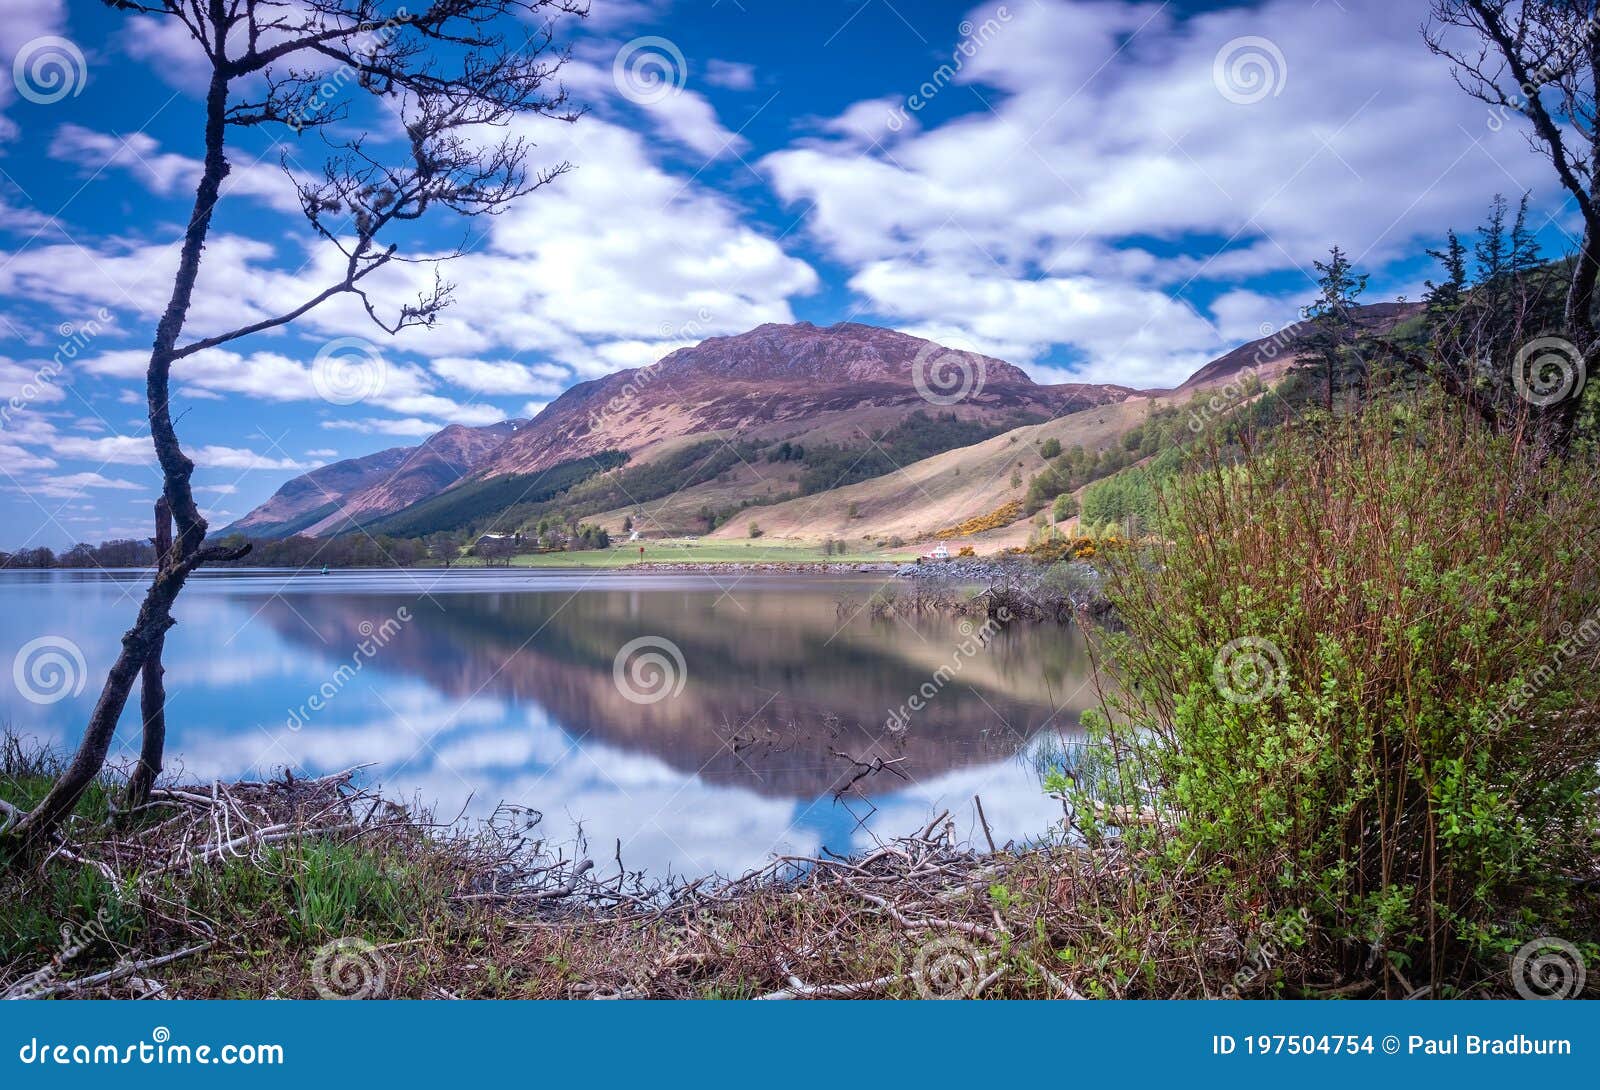 Lovely Skies Over the Calm Waters of Loch Lochy in the Scottish ...